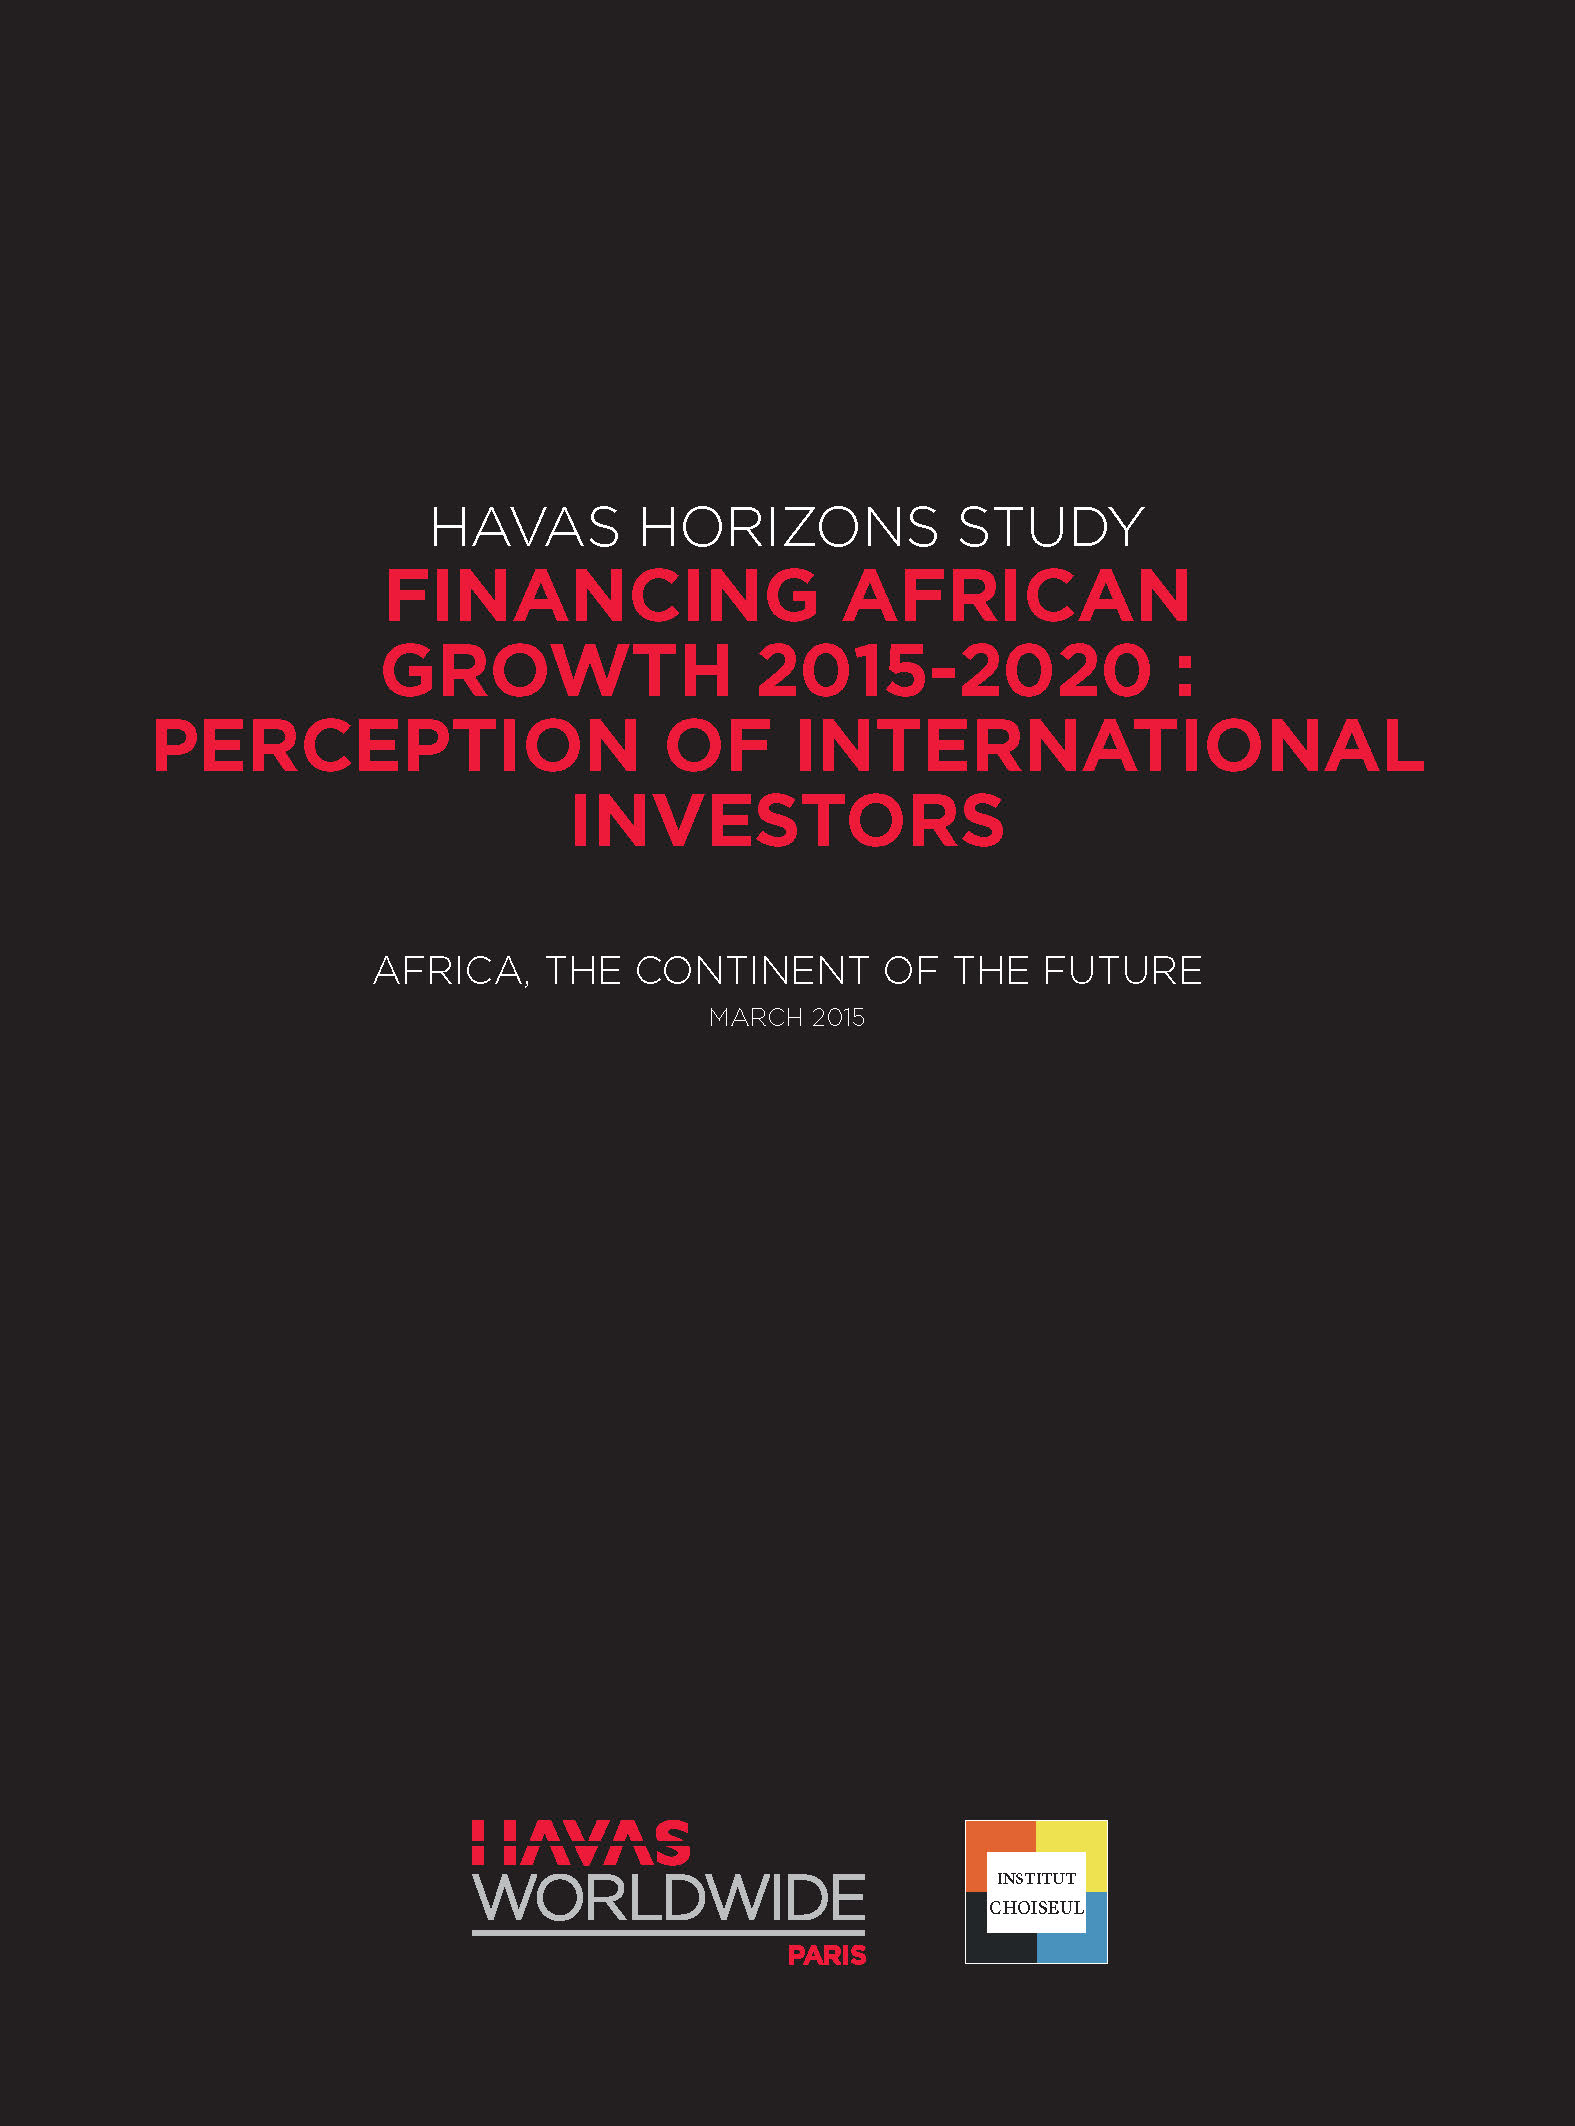 Financing African growth 2015-2020